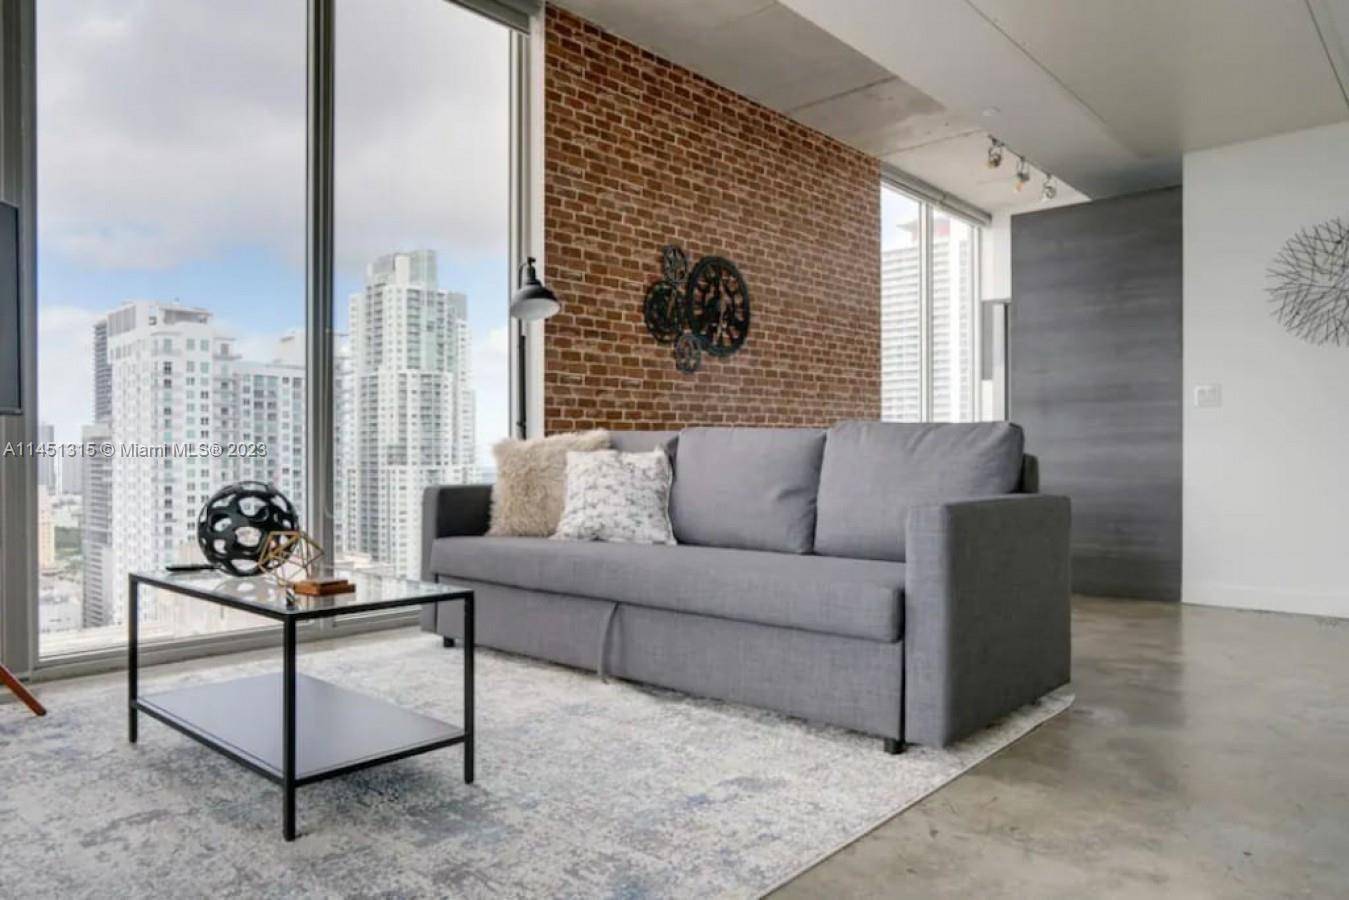 LOOKING FOR SHORT TERM TENANT Experience the most out Downtown Miami in this beautiful 1 bedroom condo unit in the heart of the city !